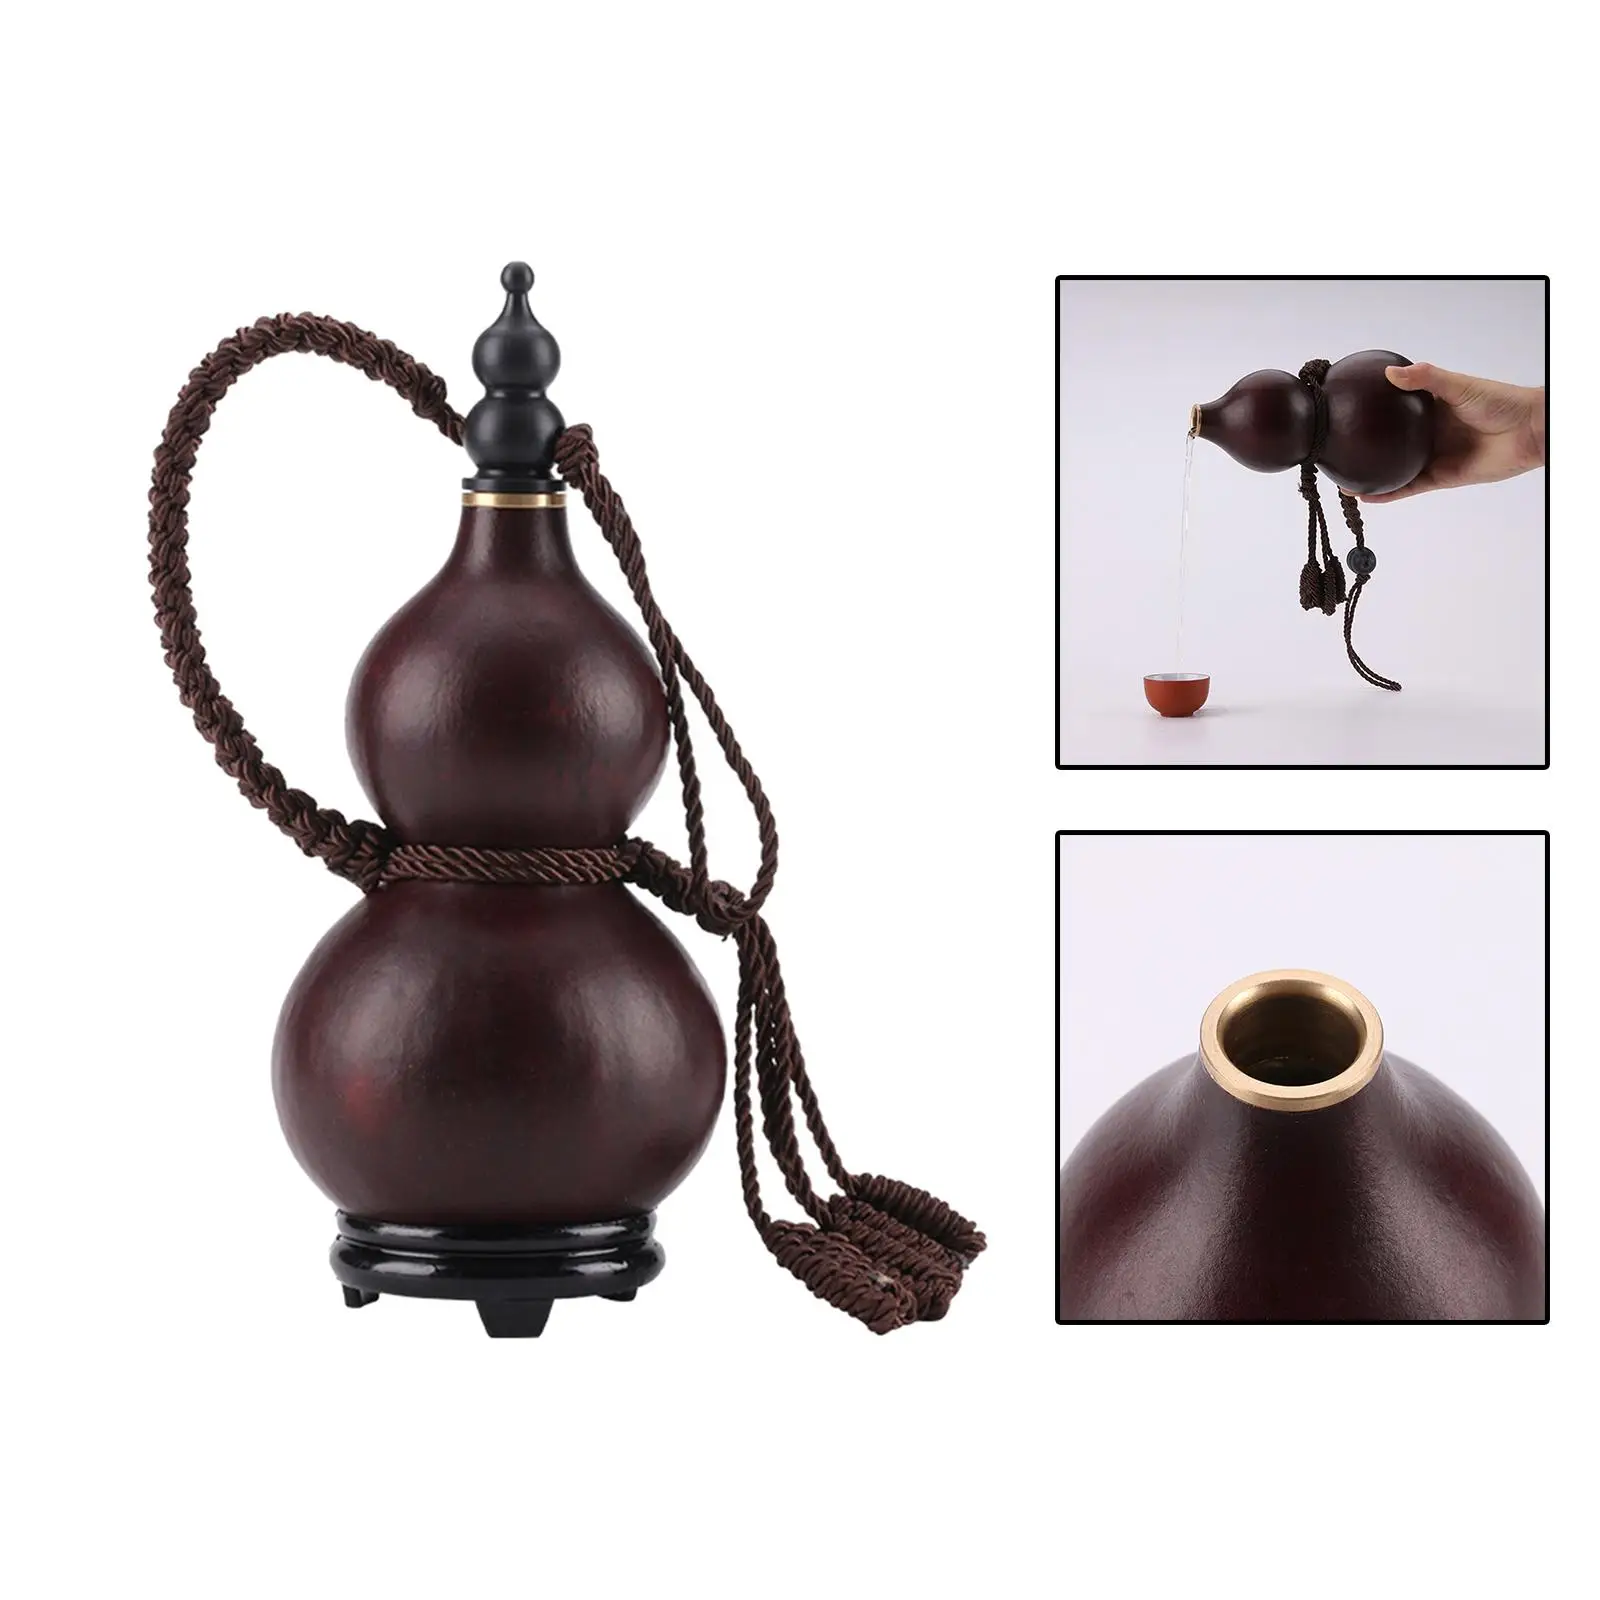 Drinking Gourd Chinese Characteristic Carving Crafts Decorative Water Bottle for Drinks Holder Camping Home Ornament